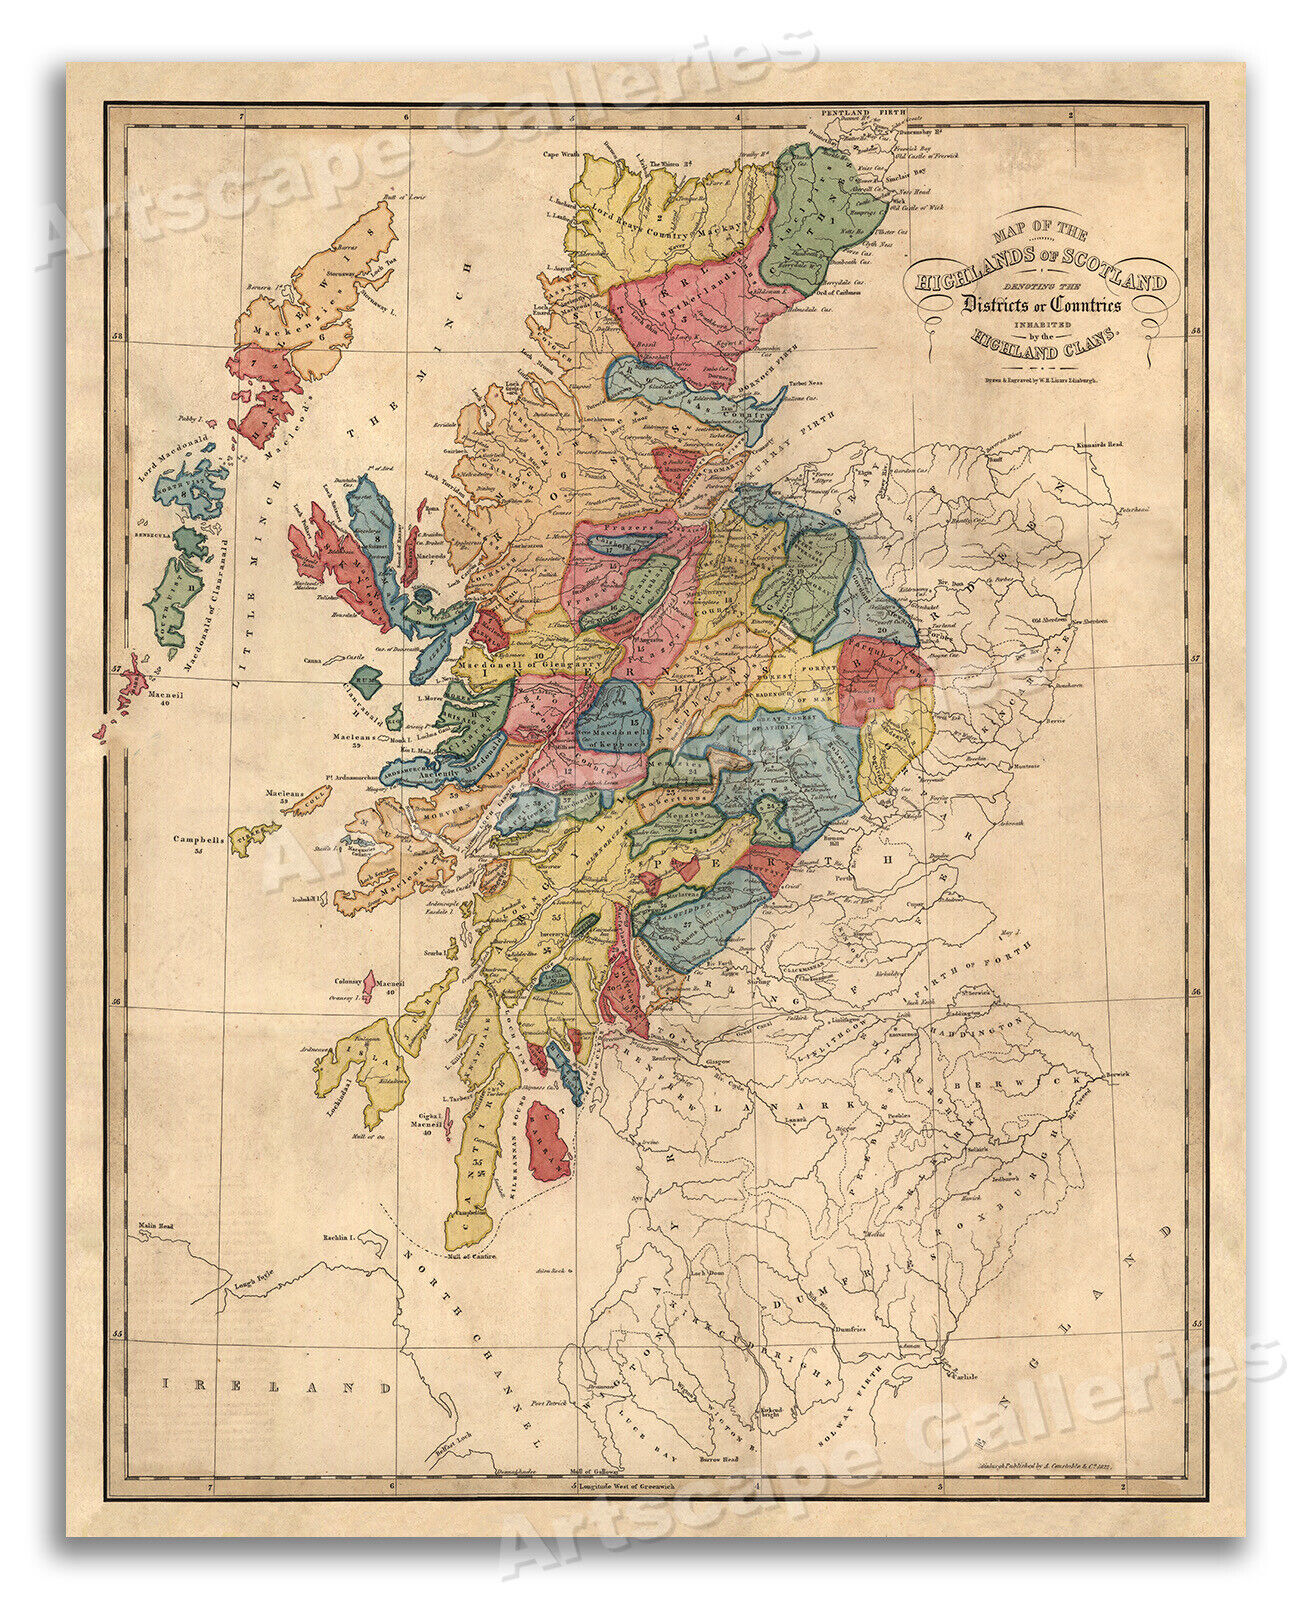 1822 Map of the Highlands of Scotland and Scottish Highland Clans - 16x20